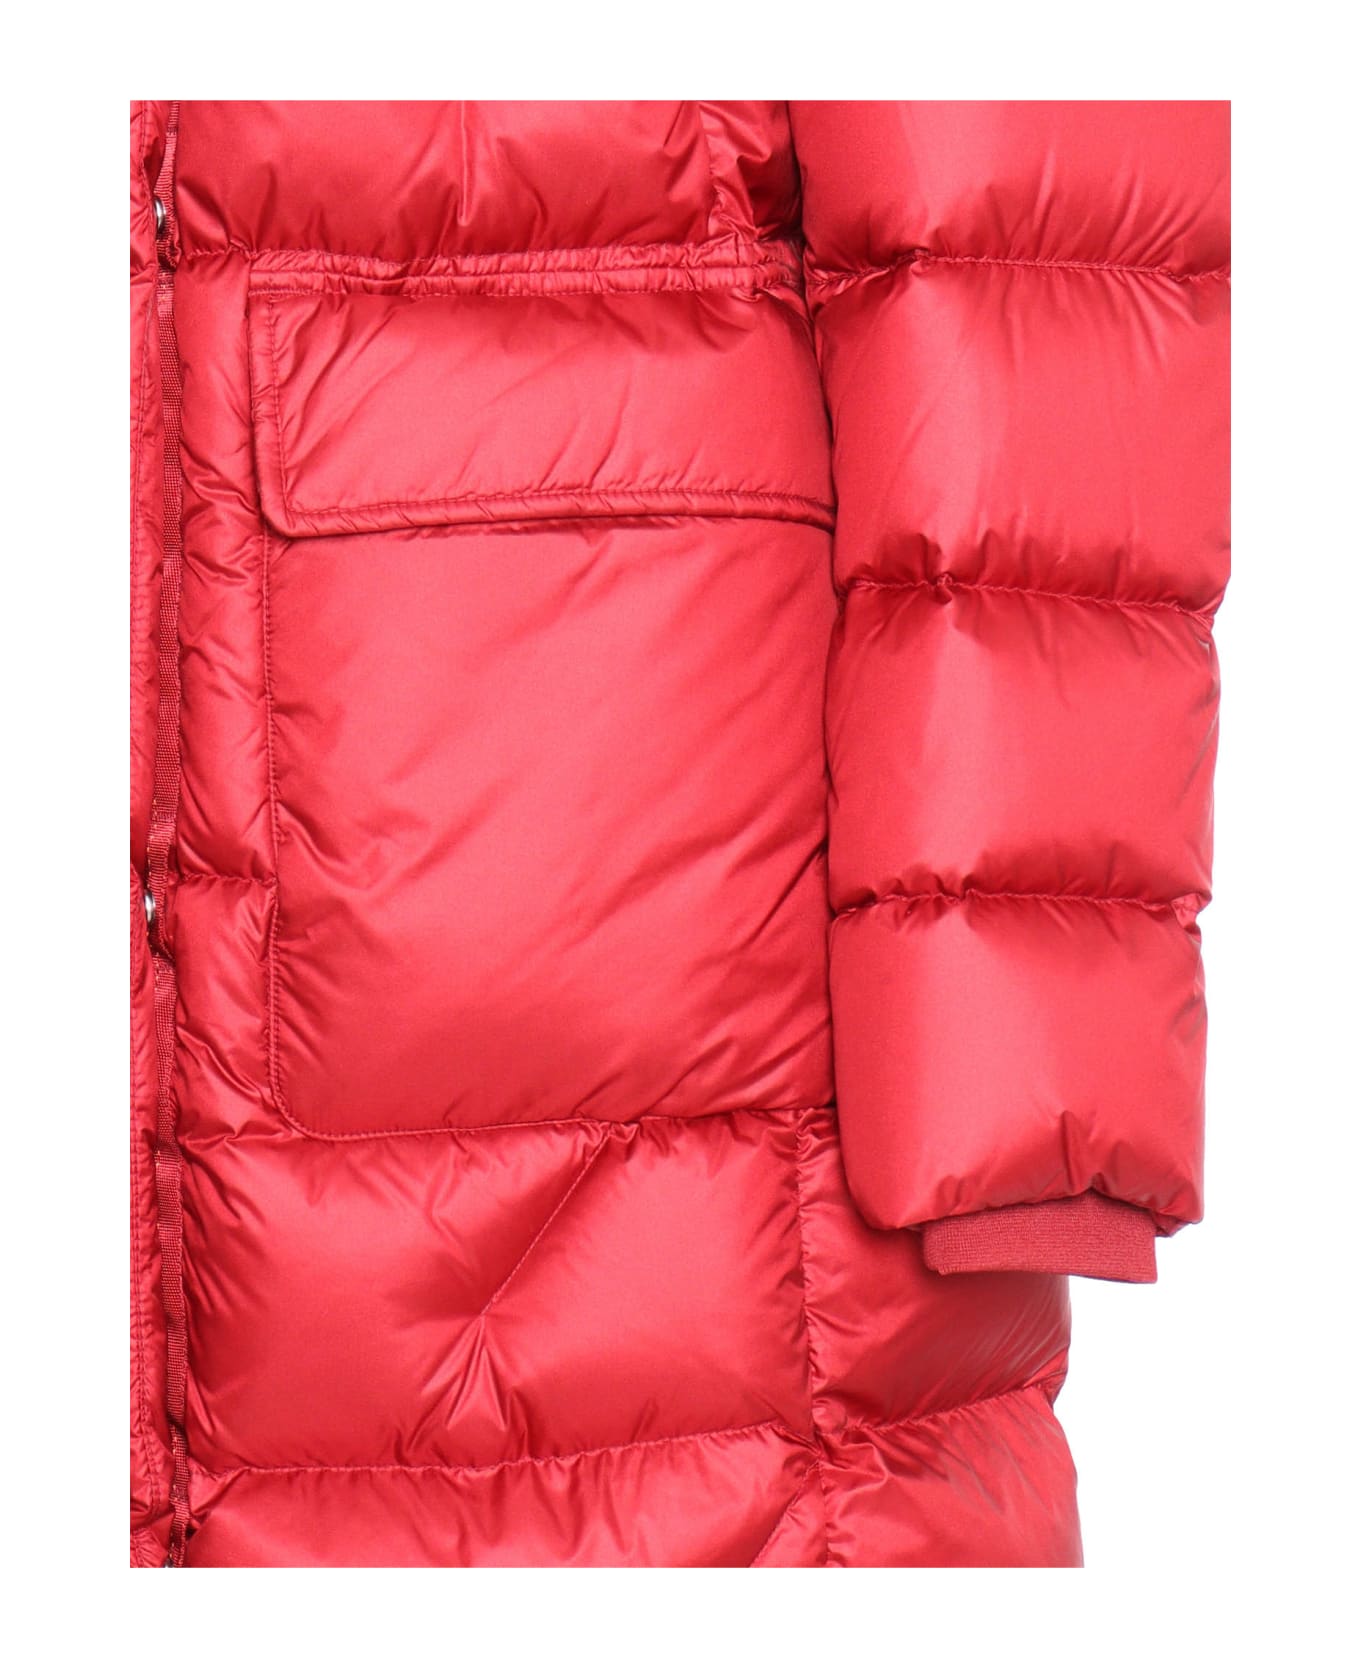 Parajumpers Leonie Down Jacket - RED